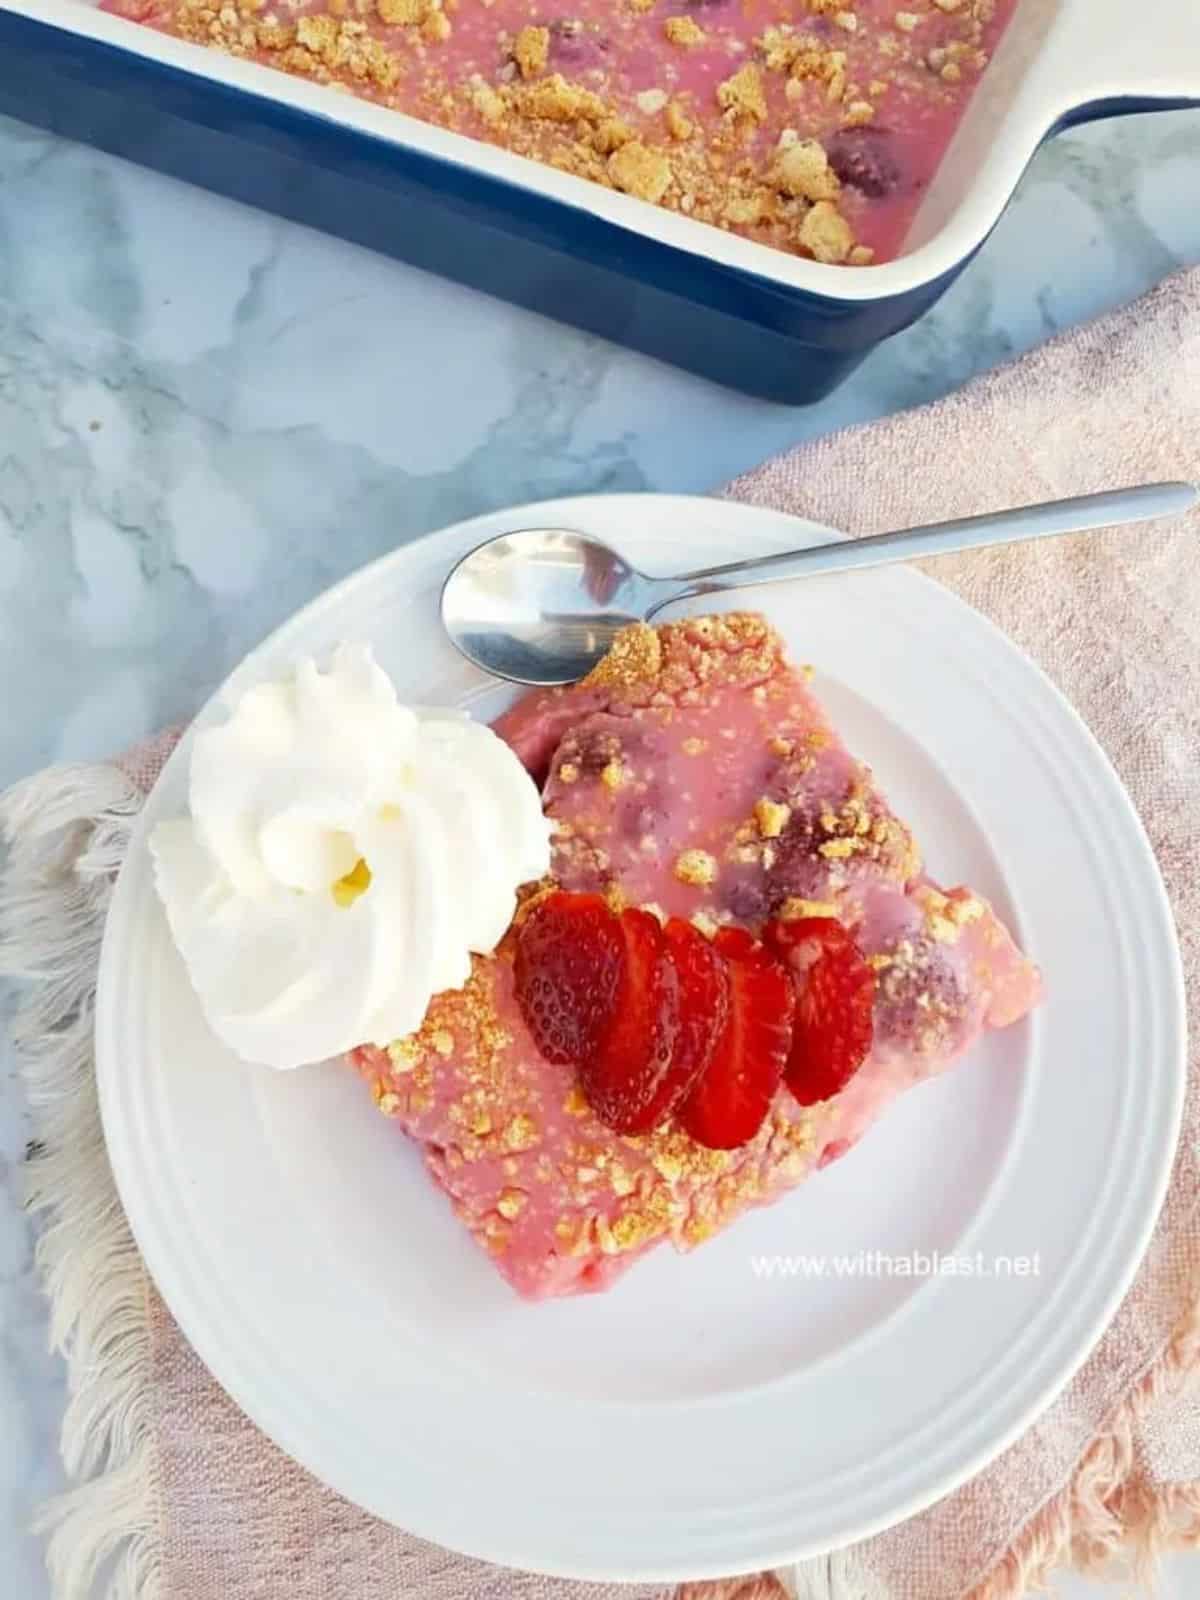 A piece of strawberry yogurt tart on a white plate with a spoon.